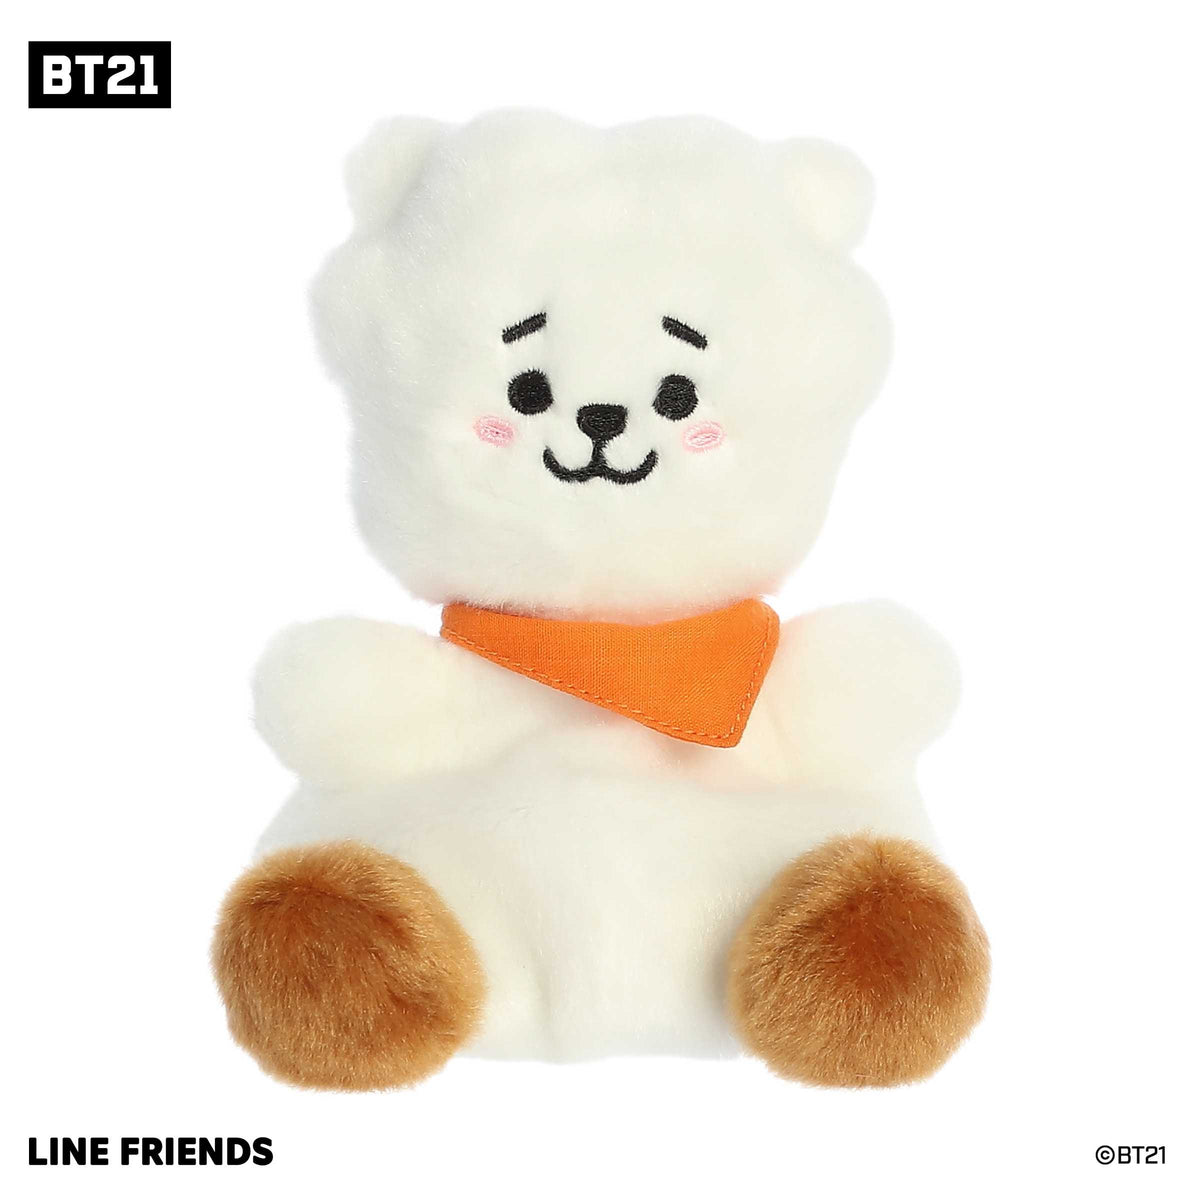 Cute mini BT21 plush toy with a fluffy white body, orange toes, wearing an orange scarf, and black accents on a smiling face